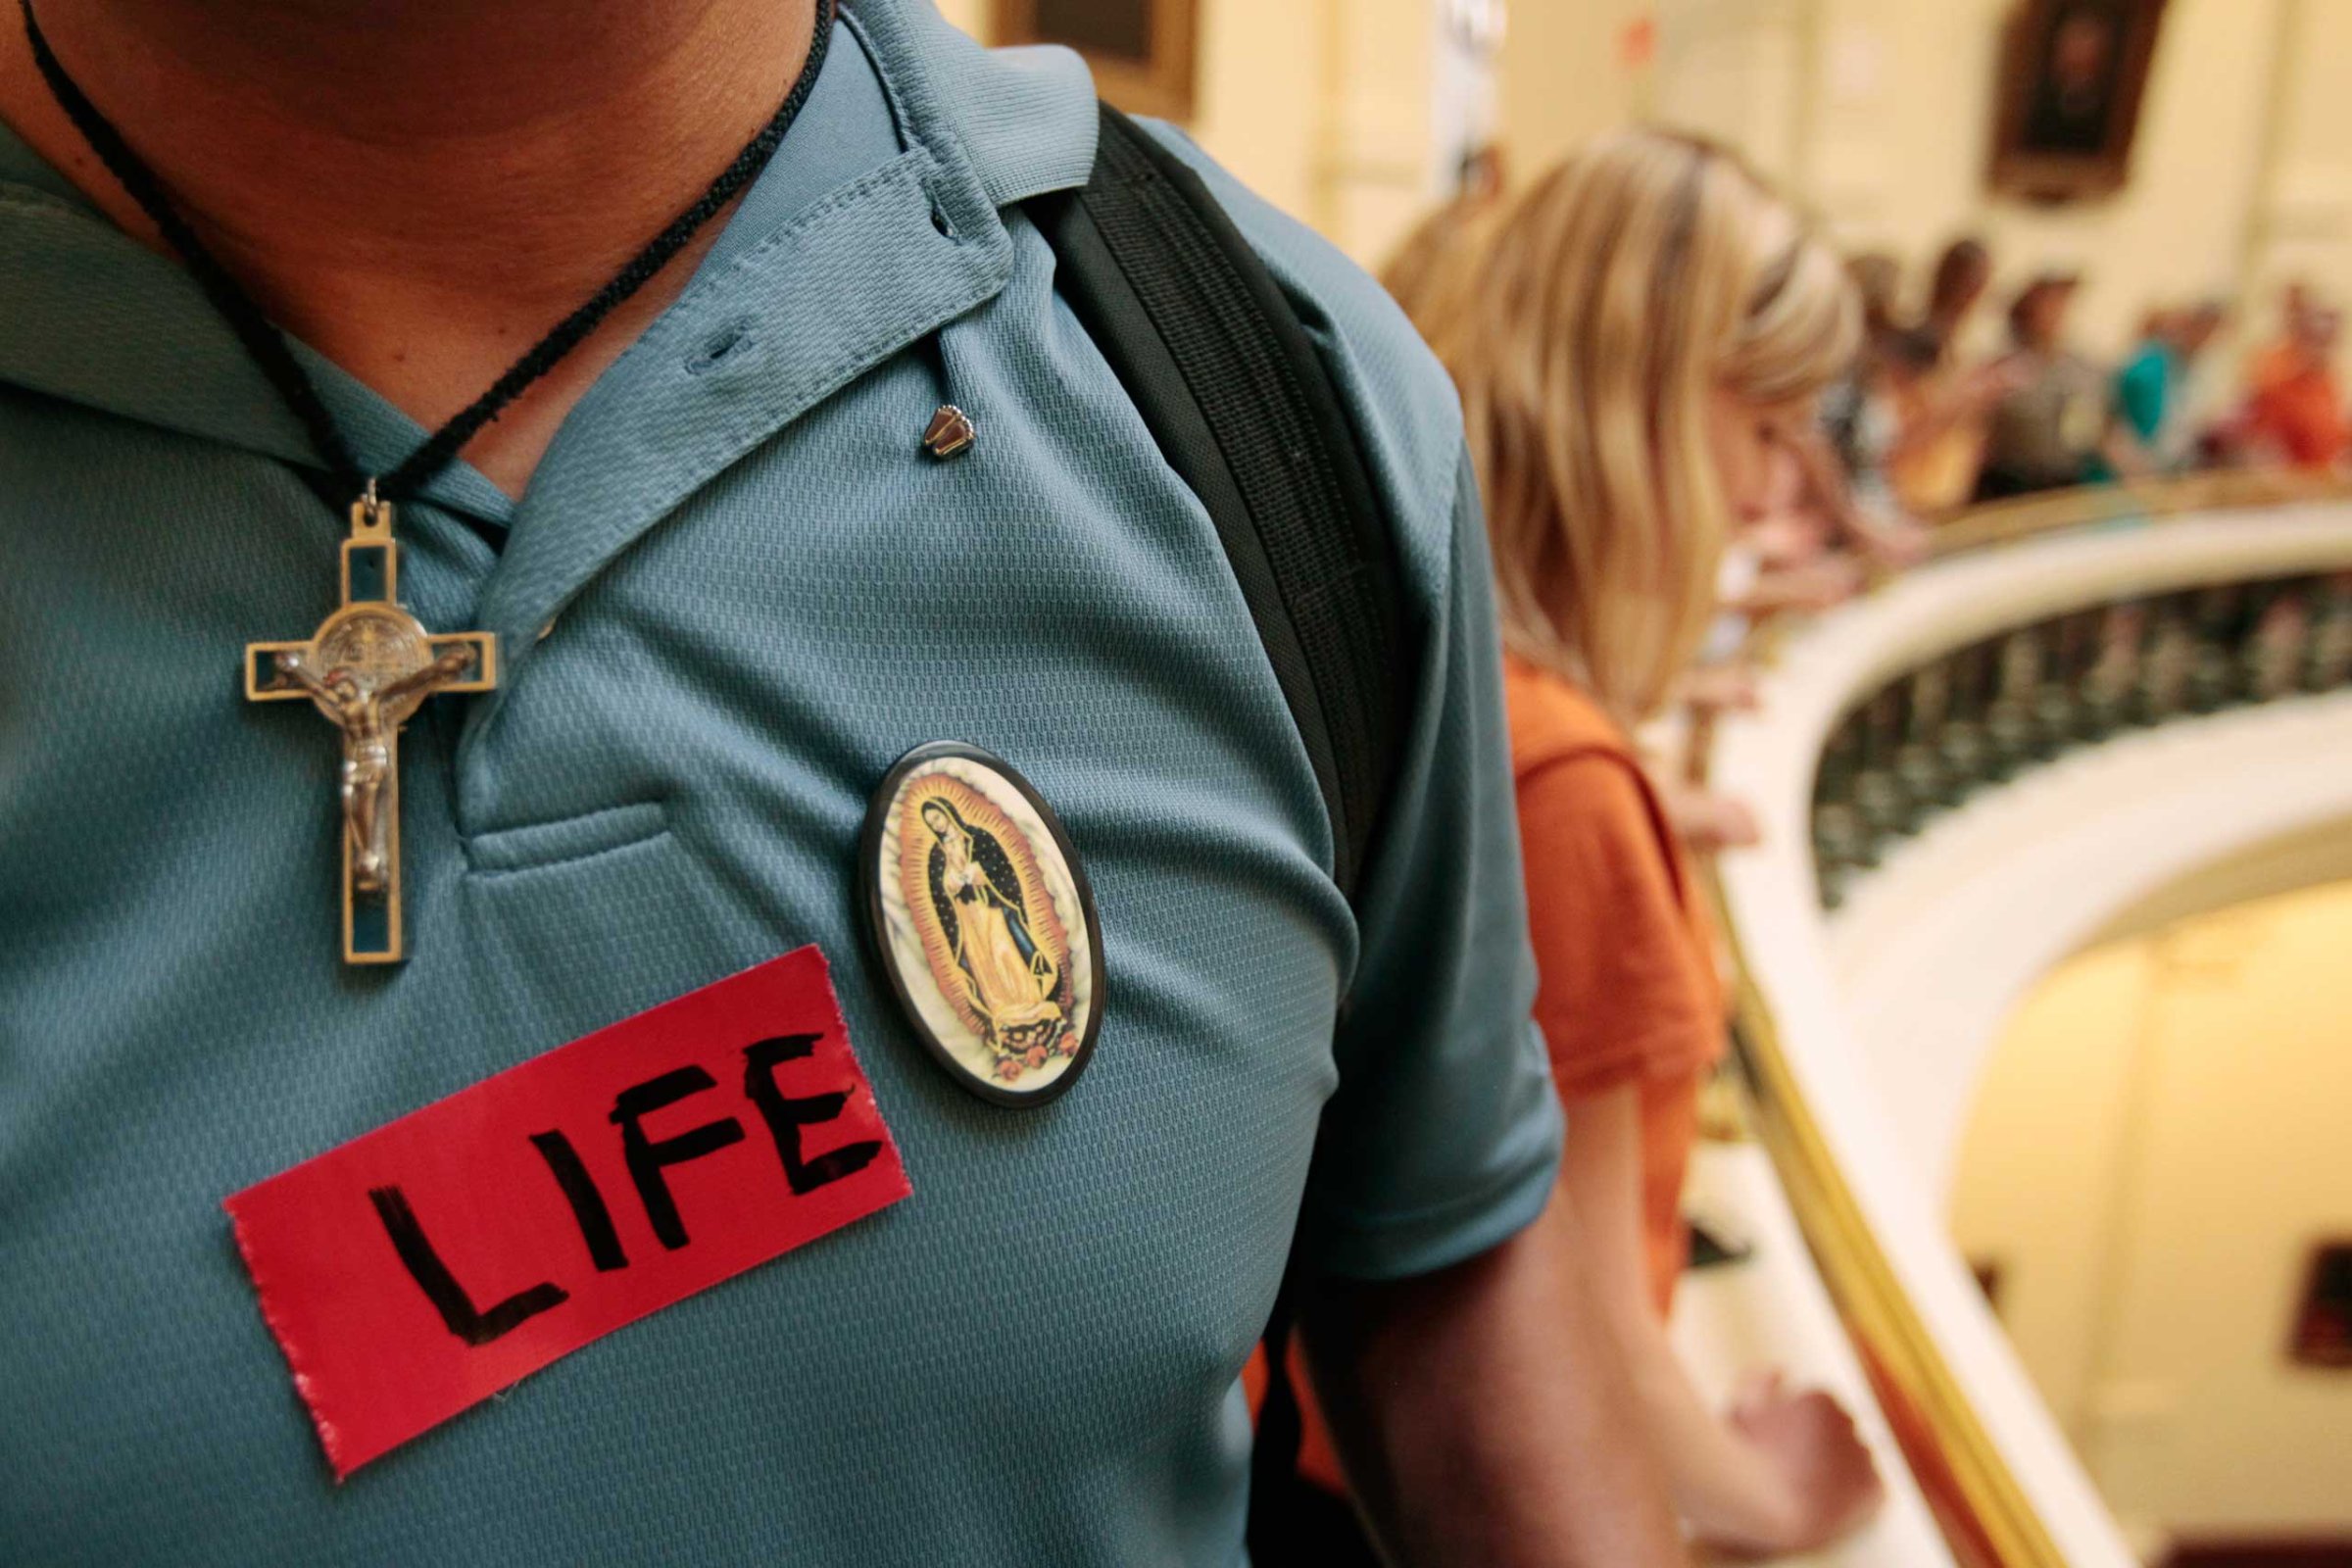 A pro-life supporter in the Texas State capitol in Austin, Texas in 2013.